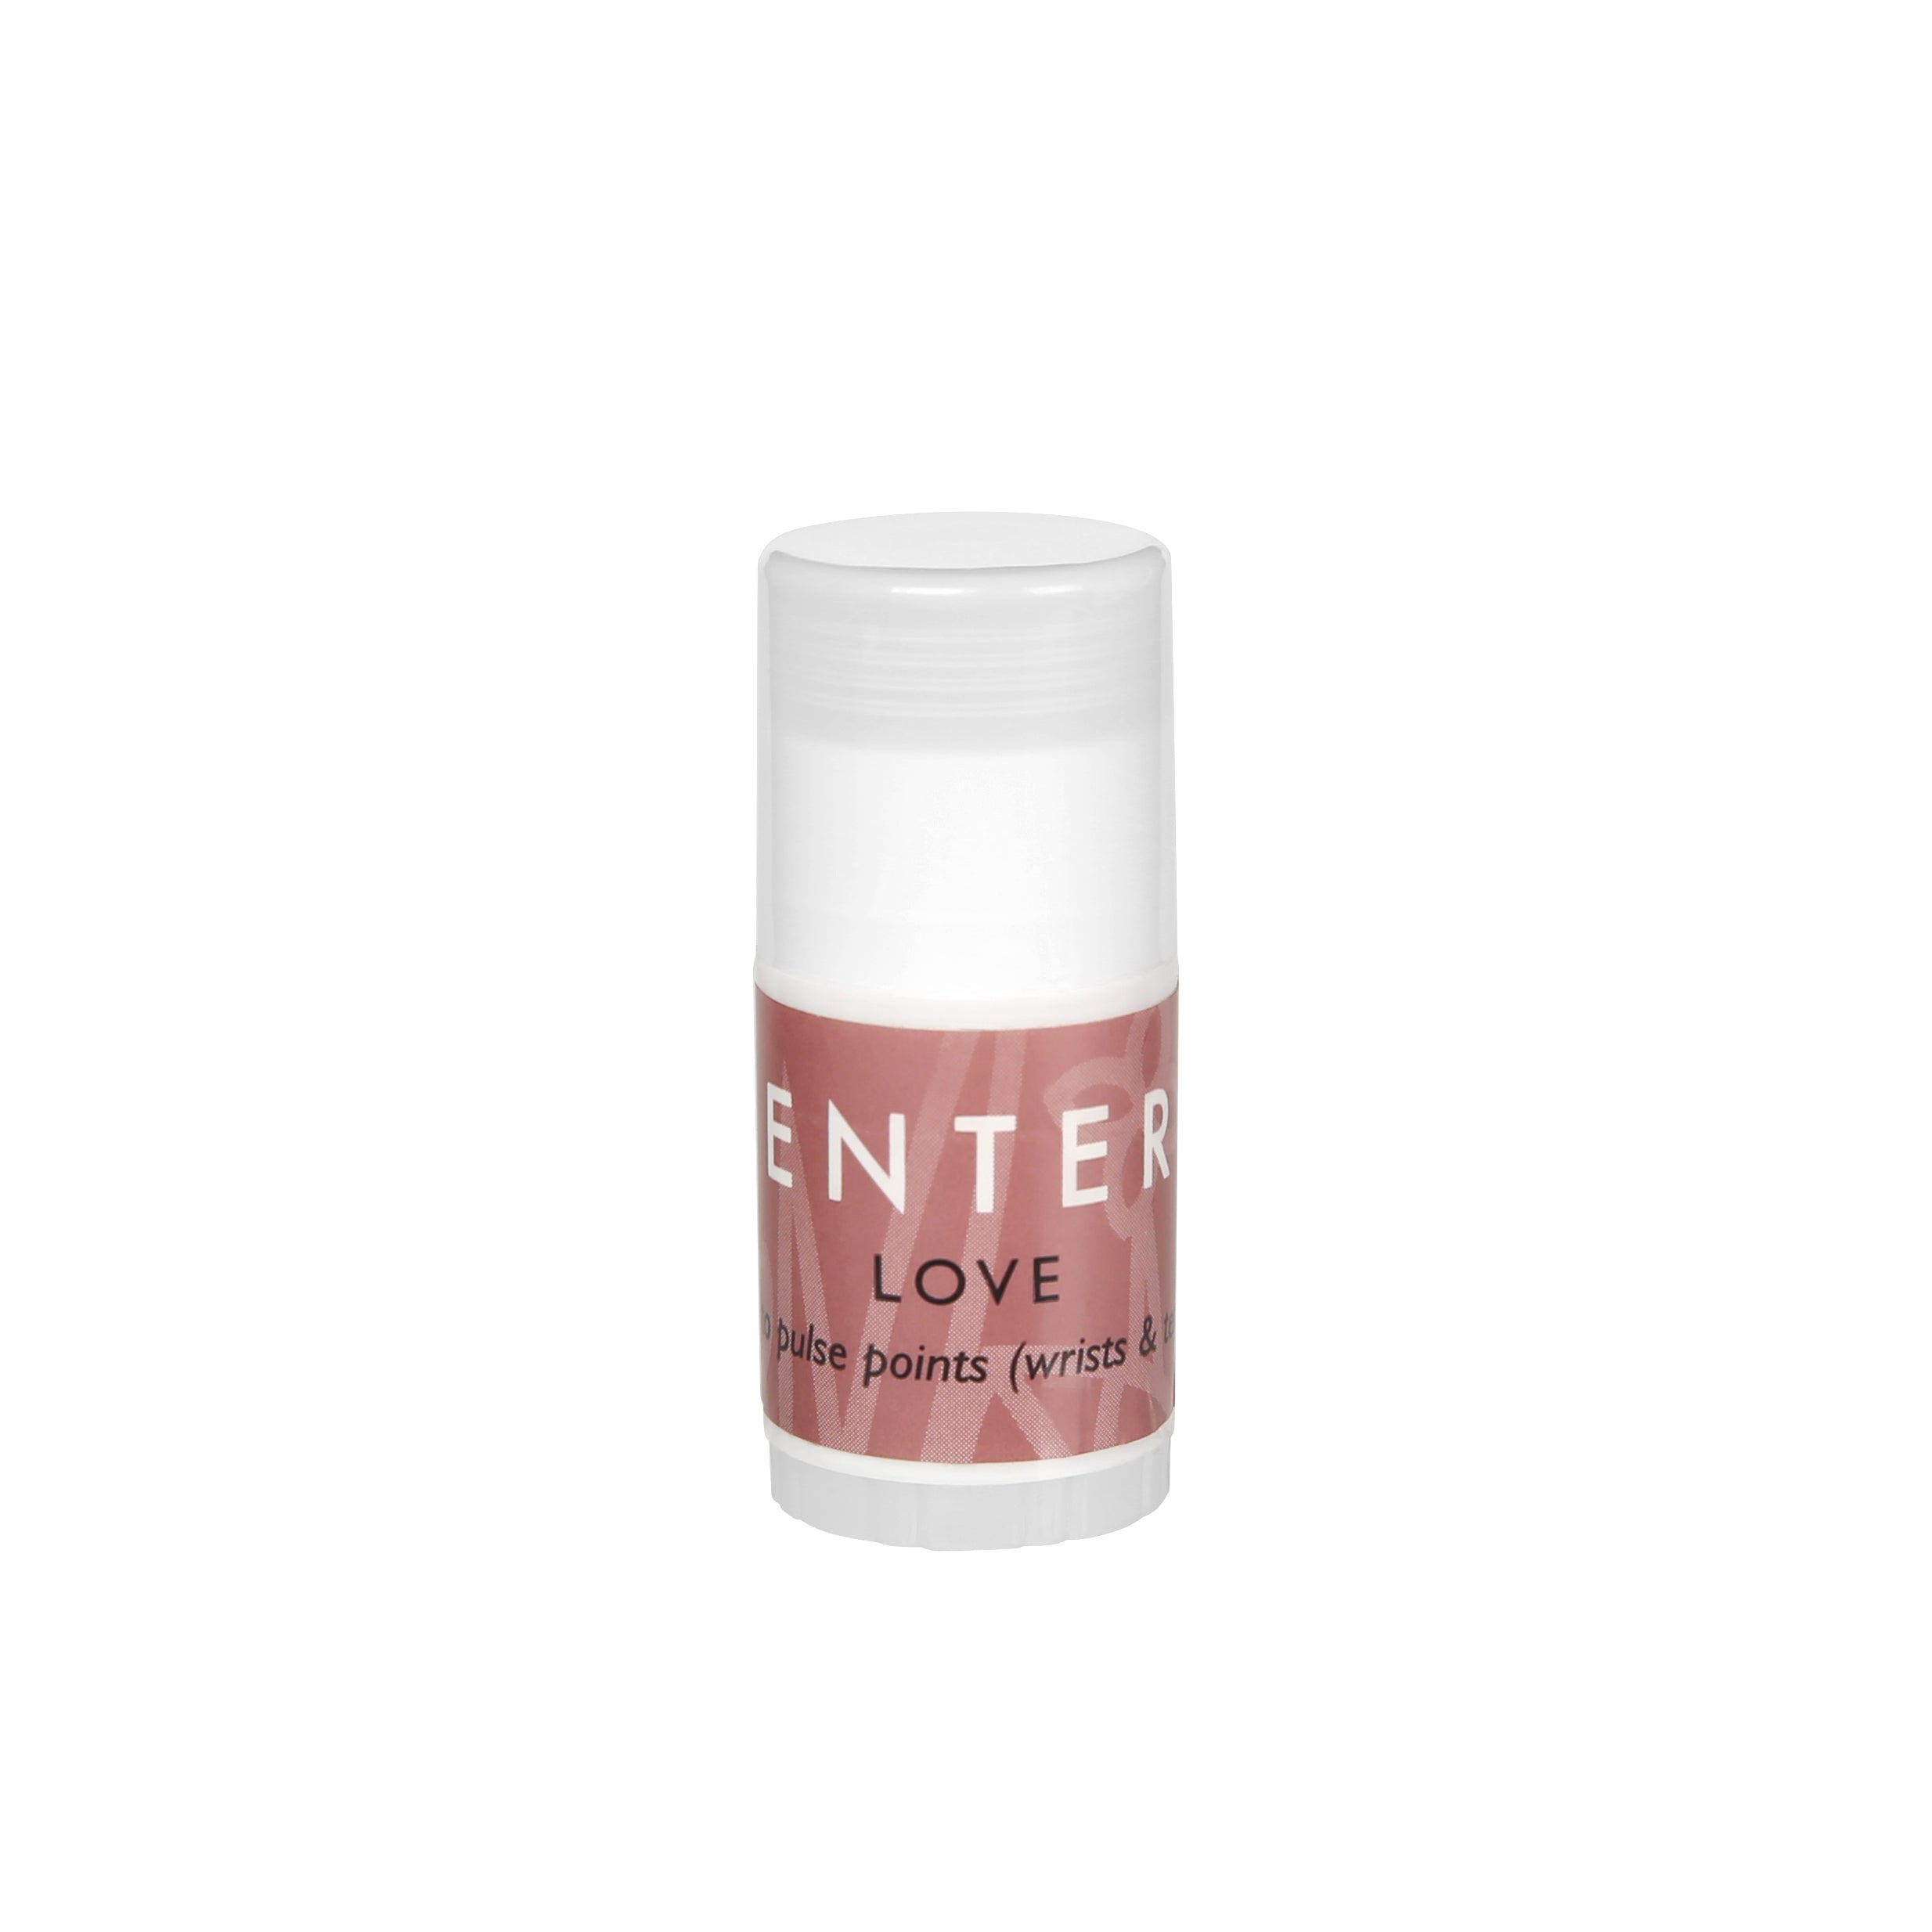 Scentered Mini Love Balm with cap on